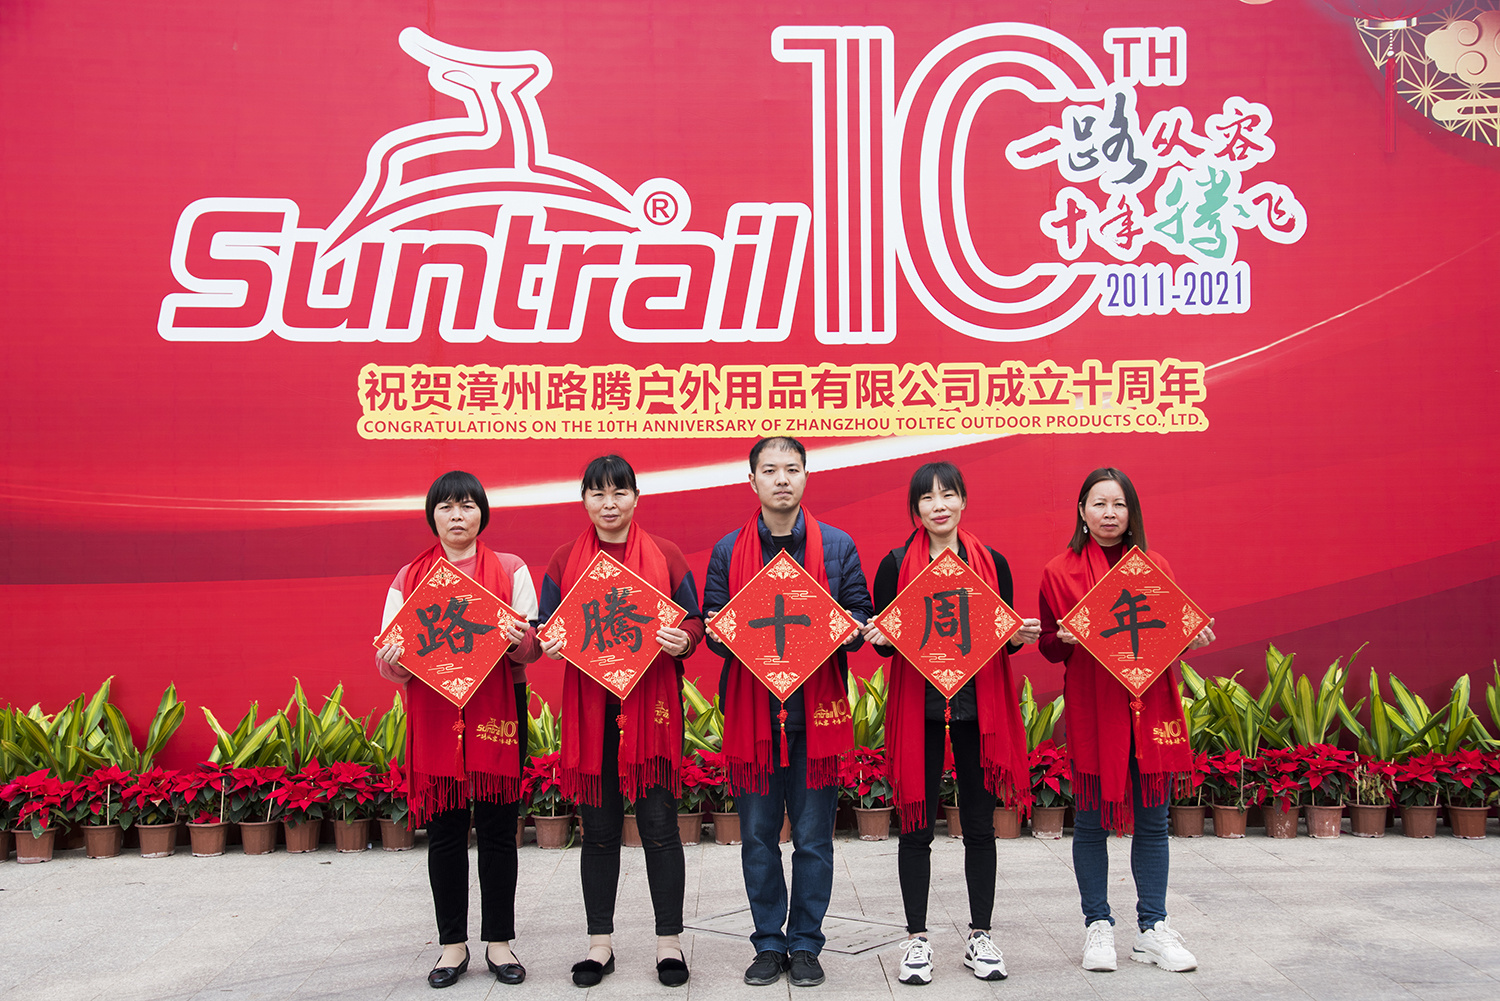 Congratulations on the 10th anniversary of the establishment of Zhangzhou Toltec Outdoor Products Co., Ltd.